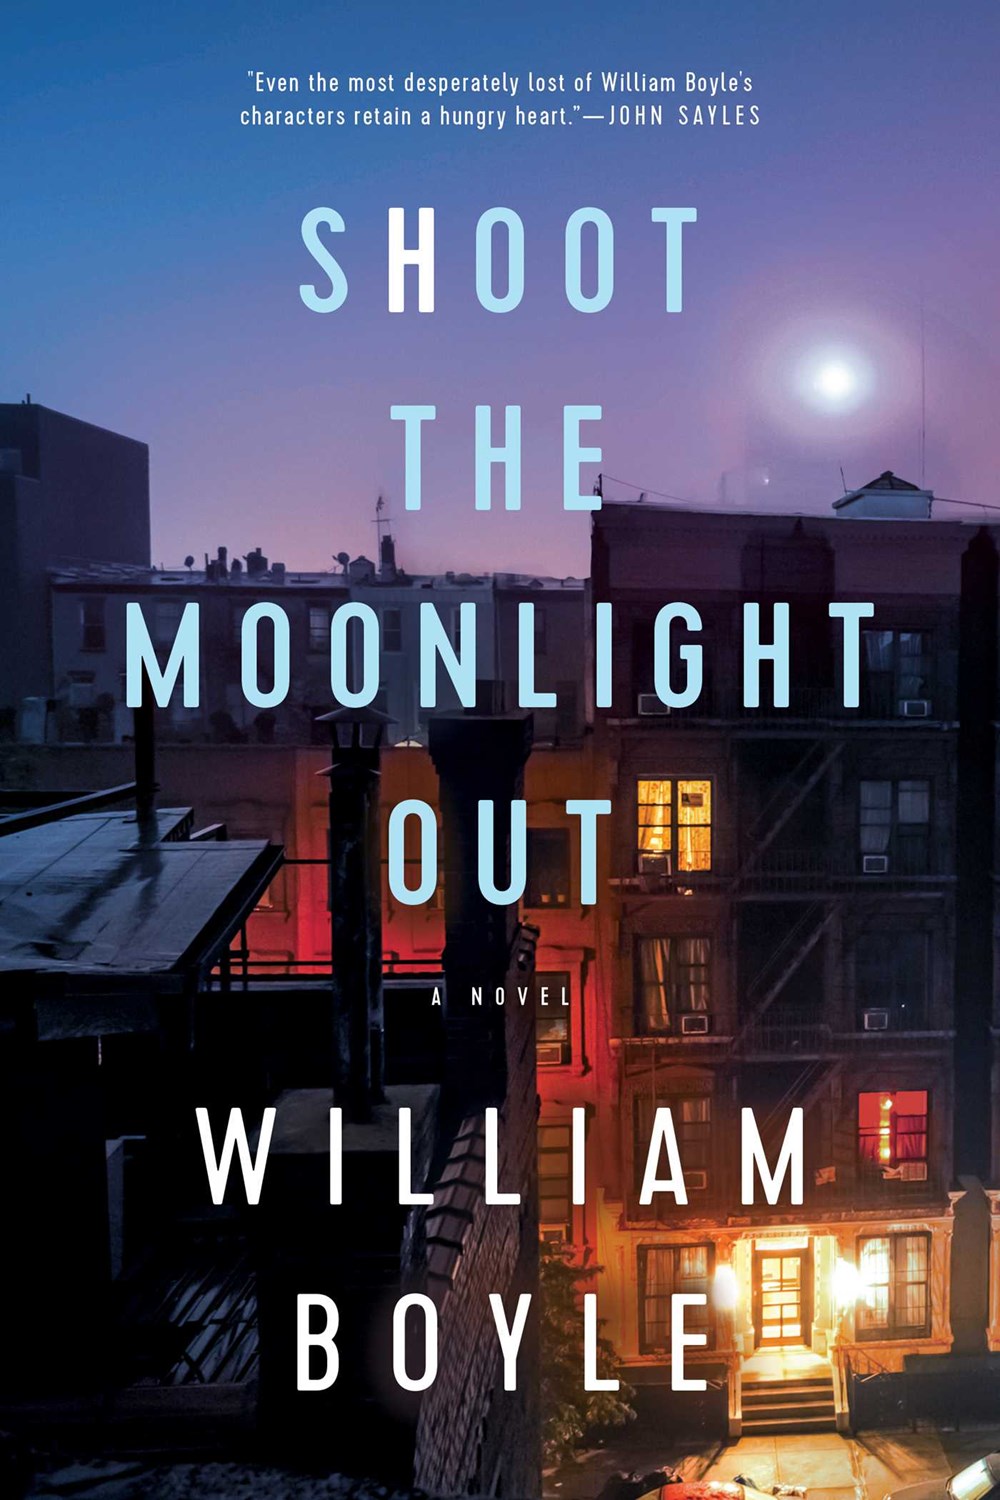 Shoot the Moonlight Out: A Novel by William Boyle